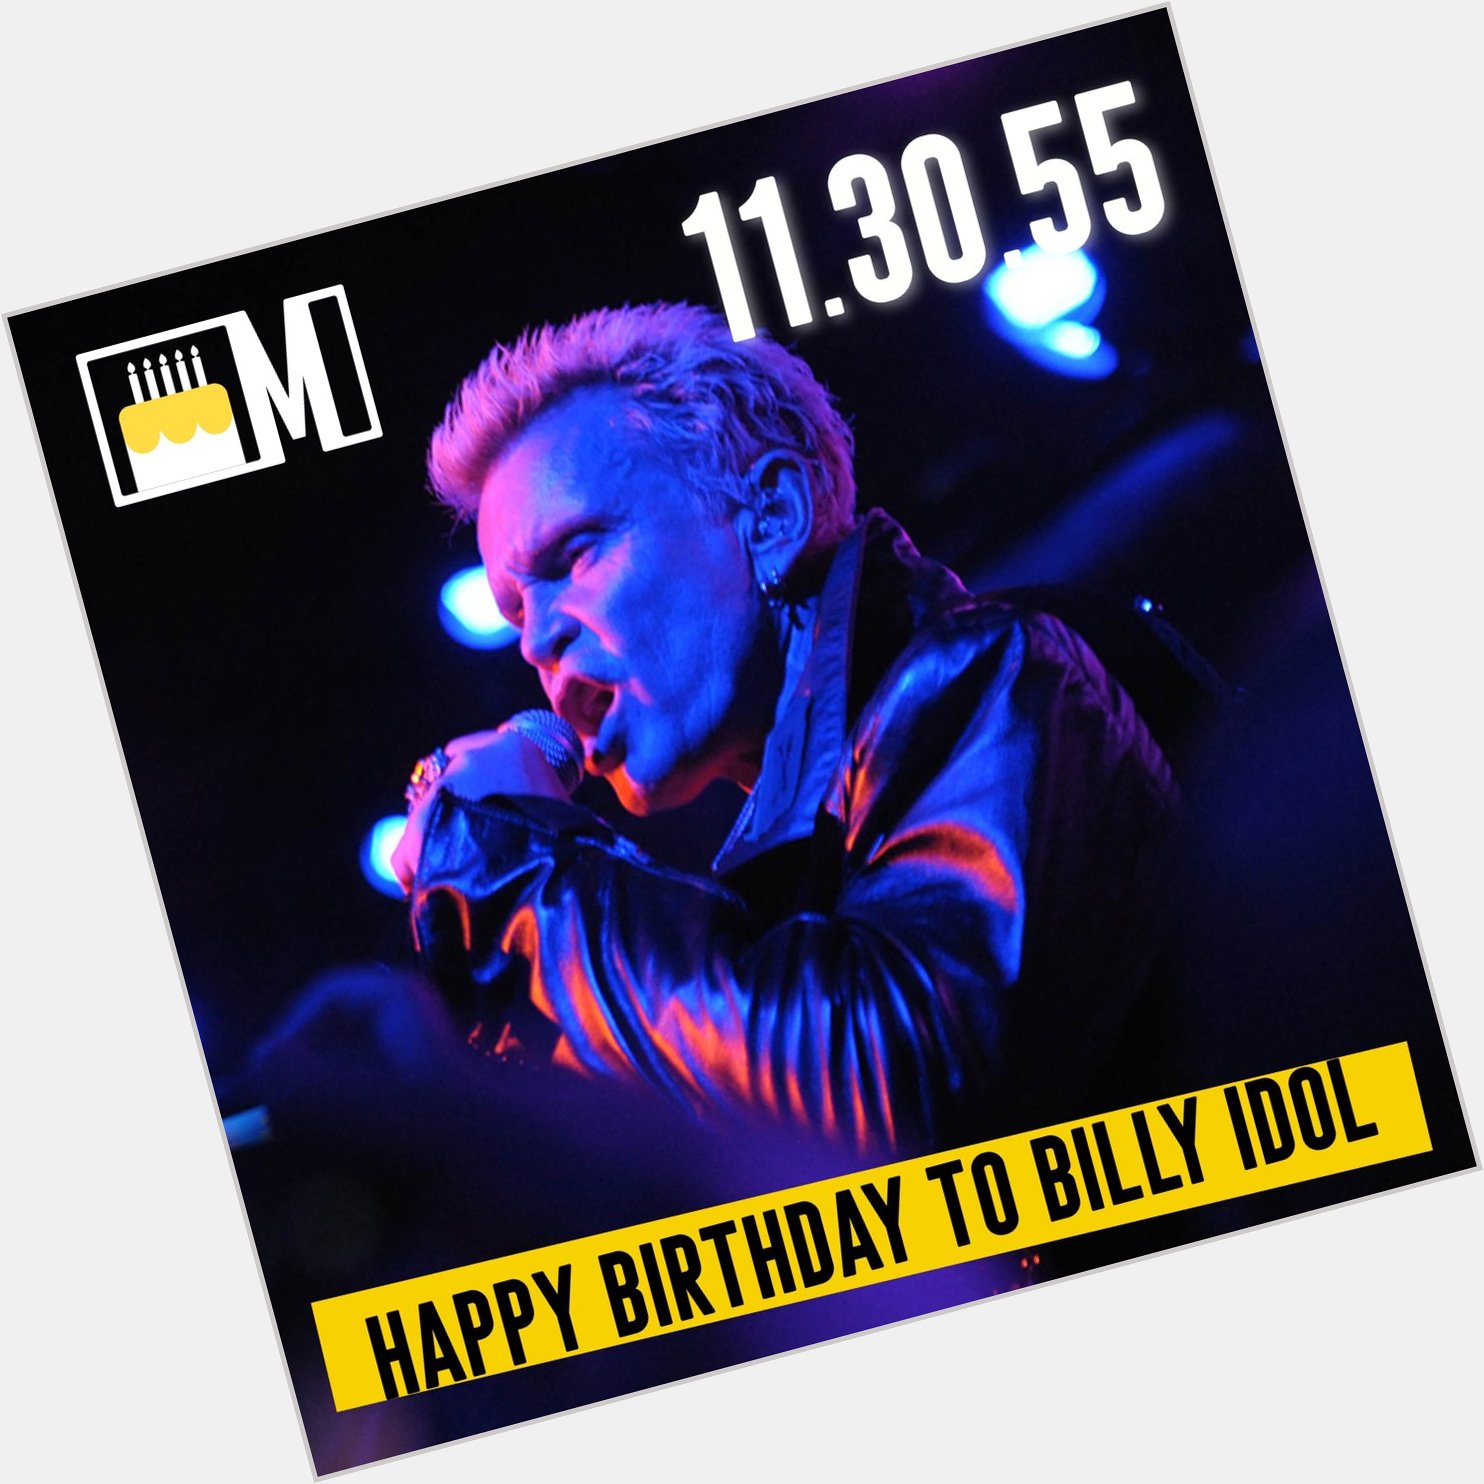 Happy Birthday to Billy Idol! Today we rock out and celebrate his 66th birthday 